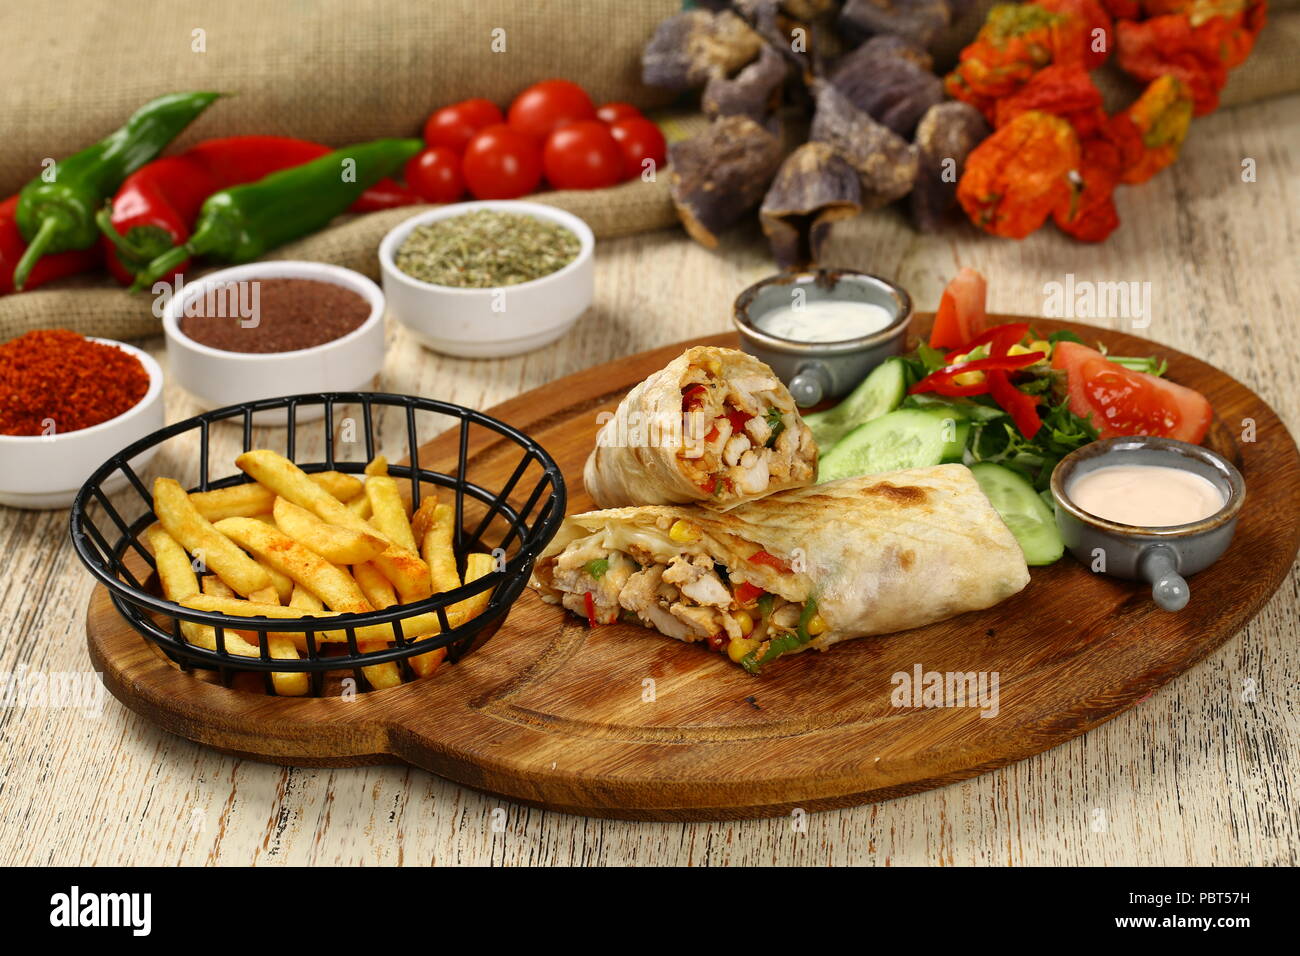 Fried chicken stuffed tortilla wrap sandwich with vegetables and french fries Stock Photo